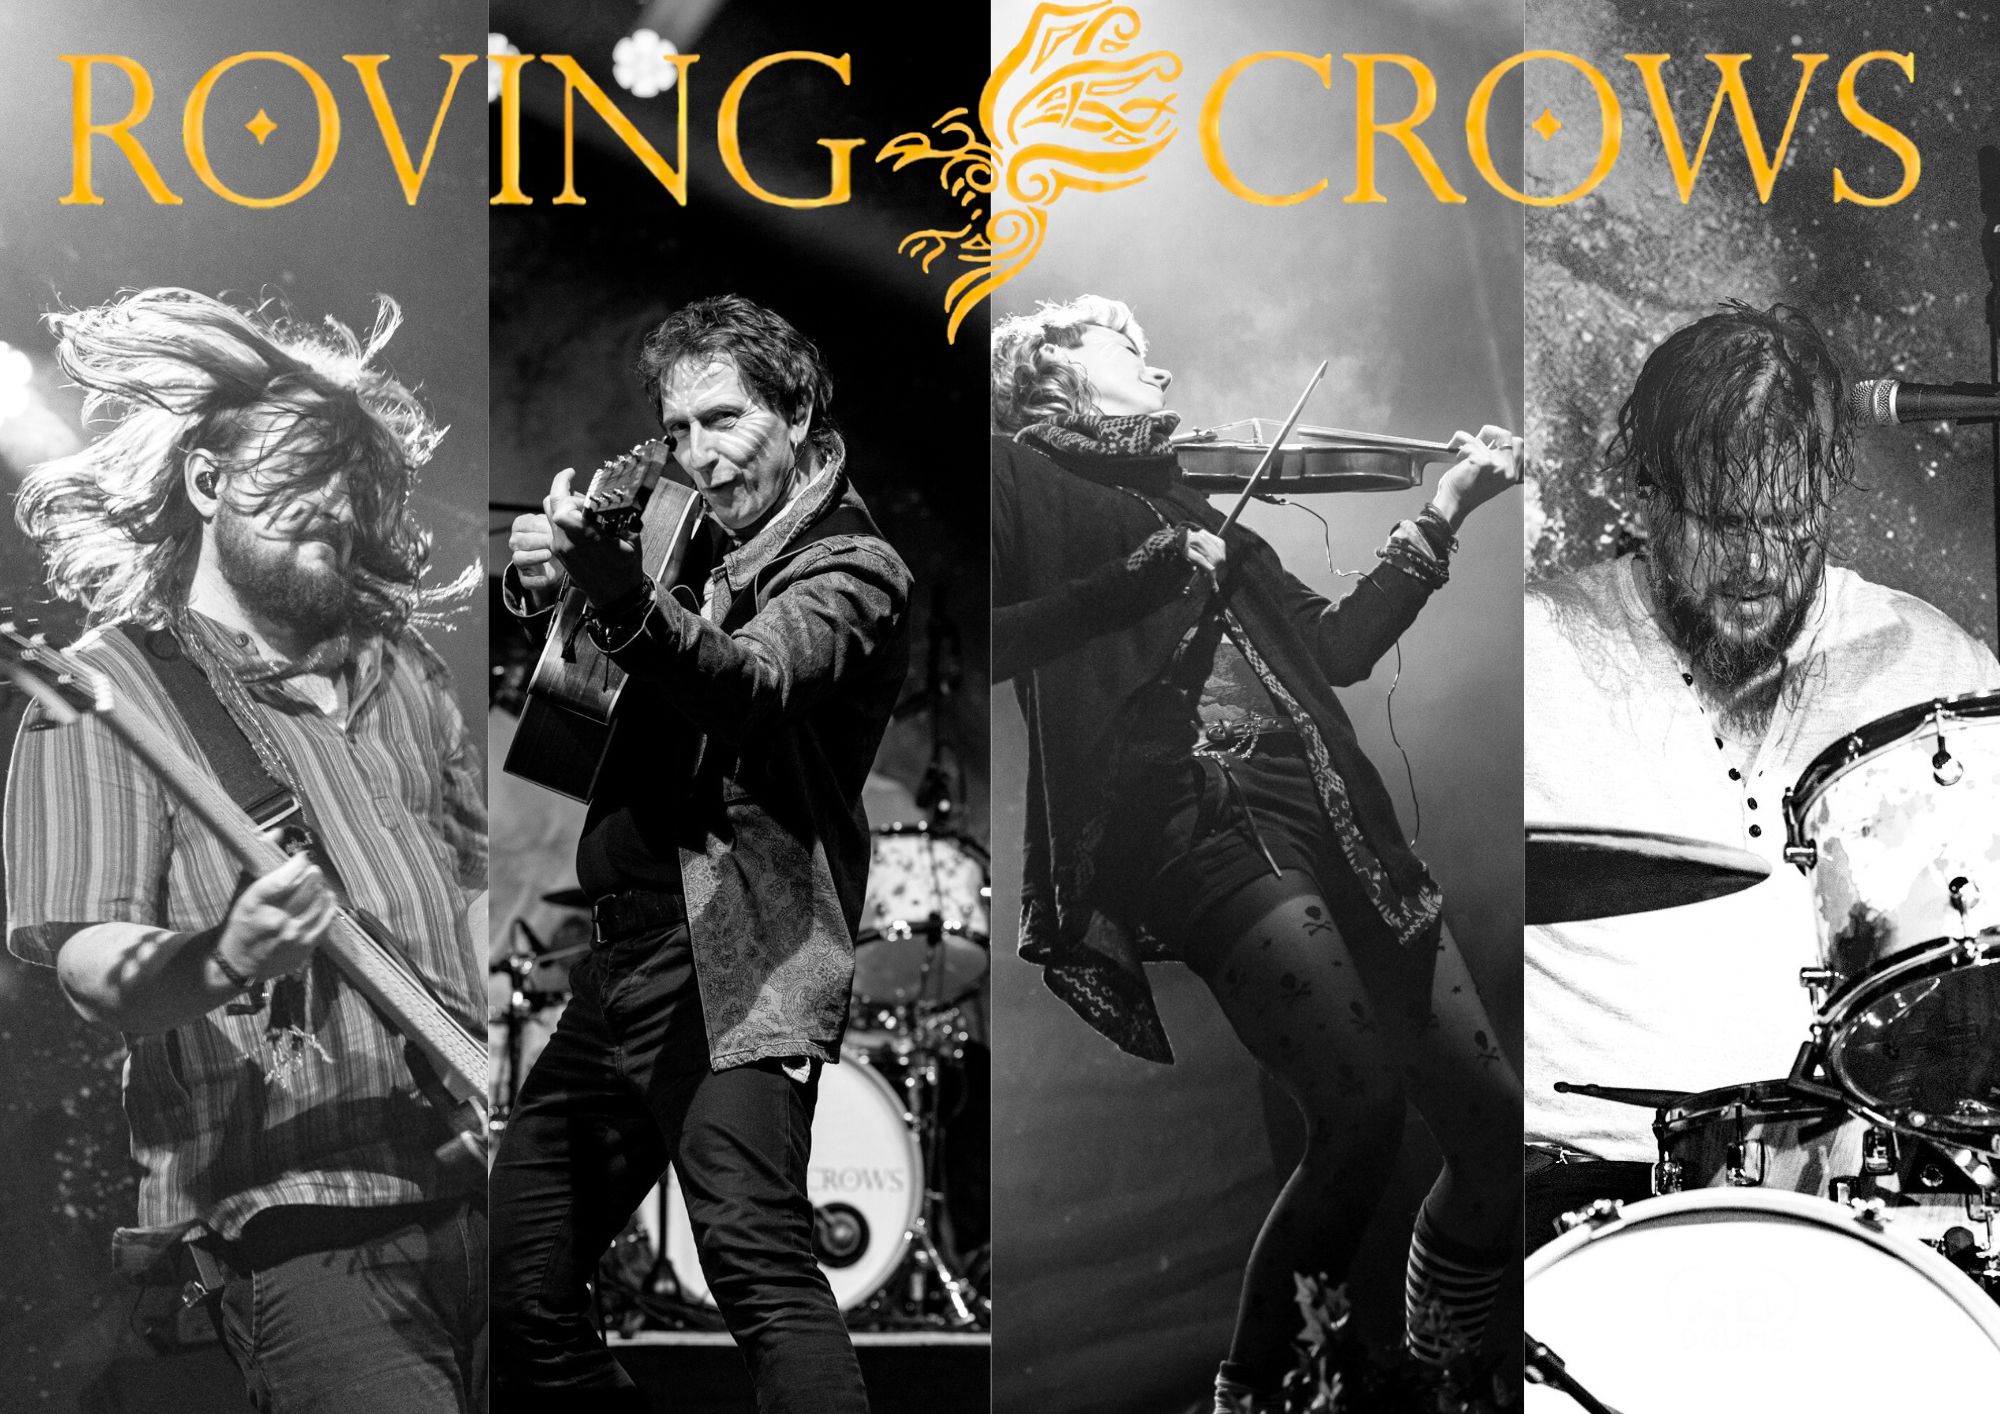 Roving Crows